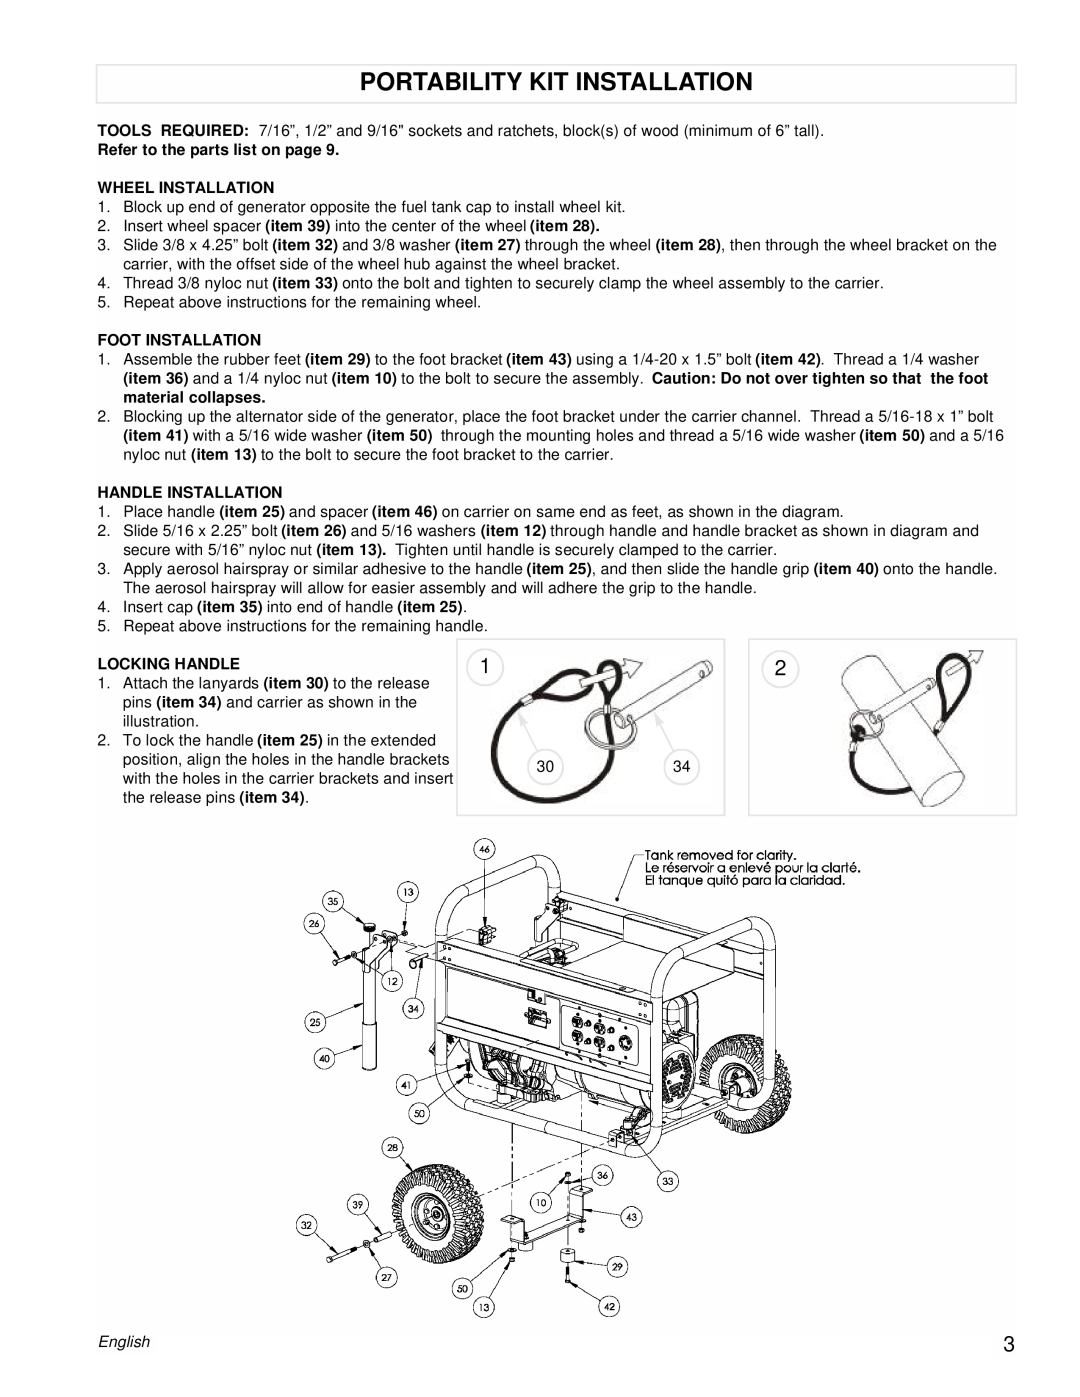 Powermate PM0106001 Portability Kit Installation, Refer to the parts list on page, Wheel Installation, Foot Installation 